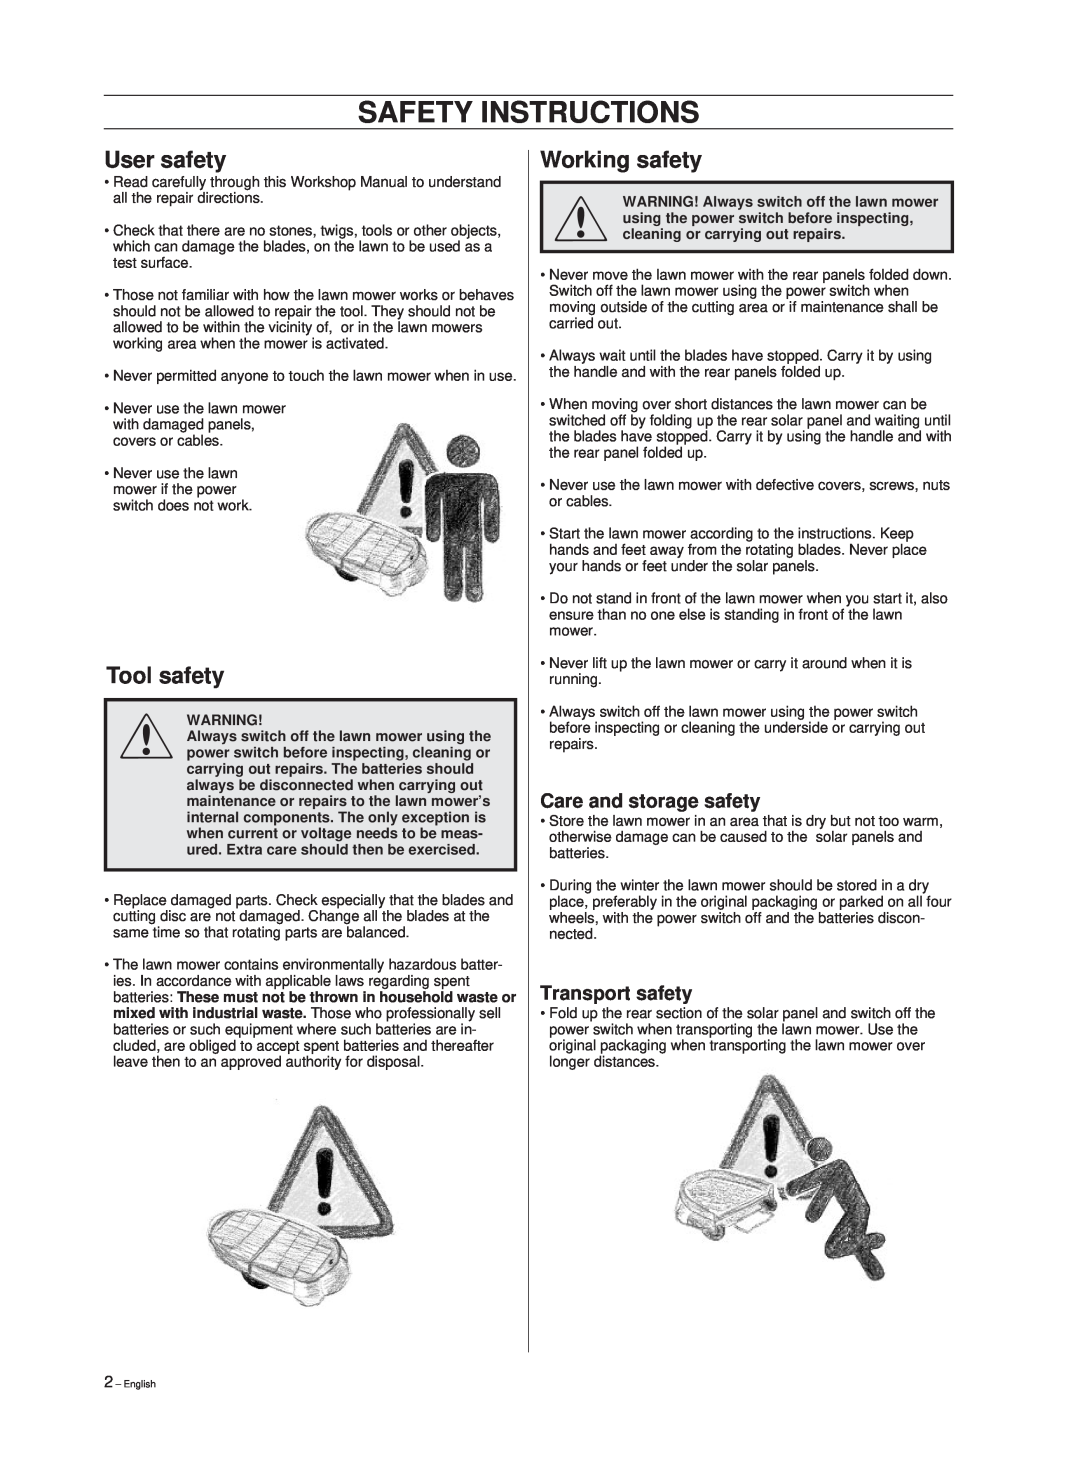 Hayter Mowers 101 88 90-26 manual Safety Instructions, User safety, Tool safety, Working safety, Care and storage safety 